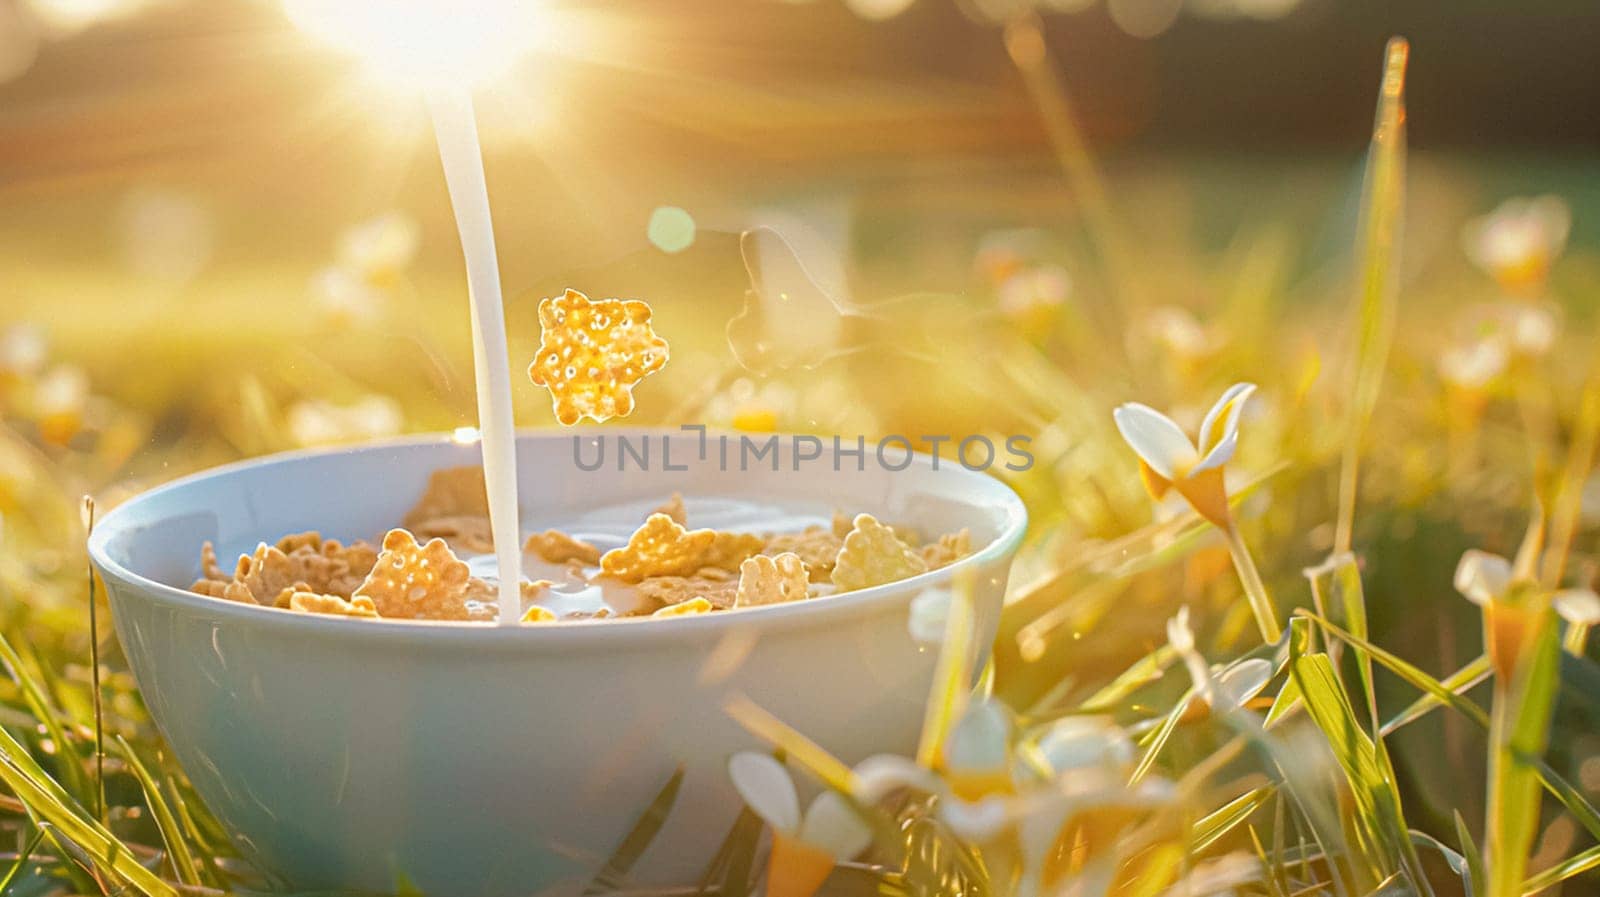 Pouring fresh milk into bowl of cereal in the English countryside field on a sunny morning for breakfast